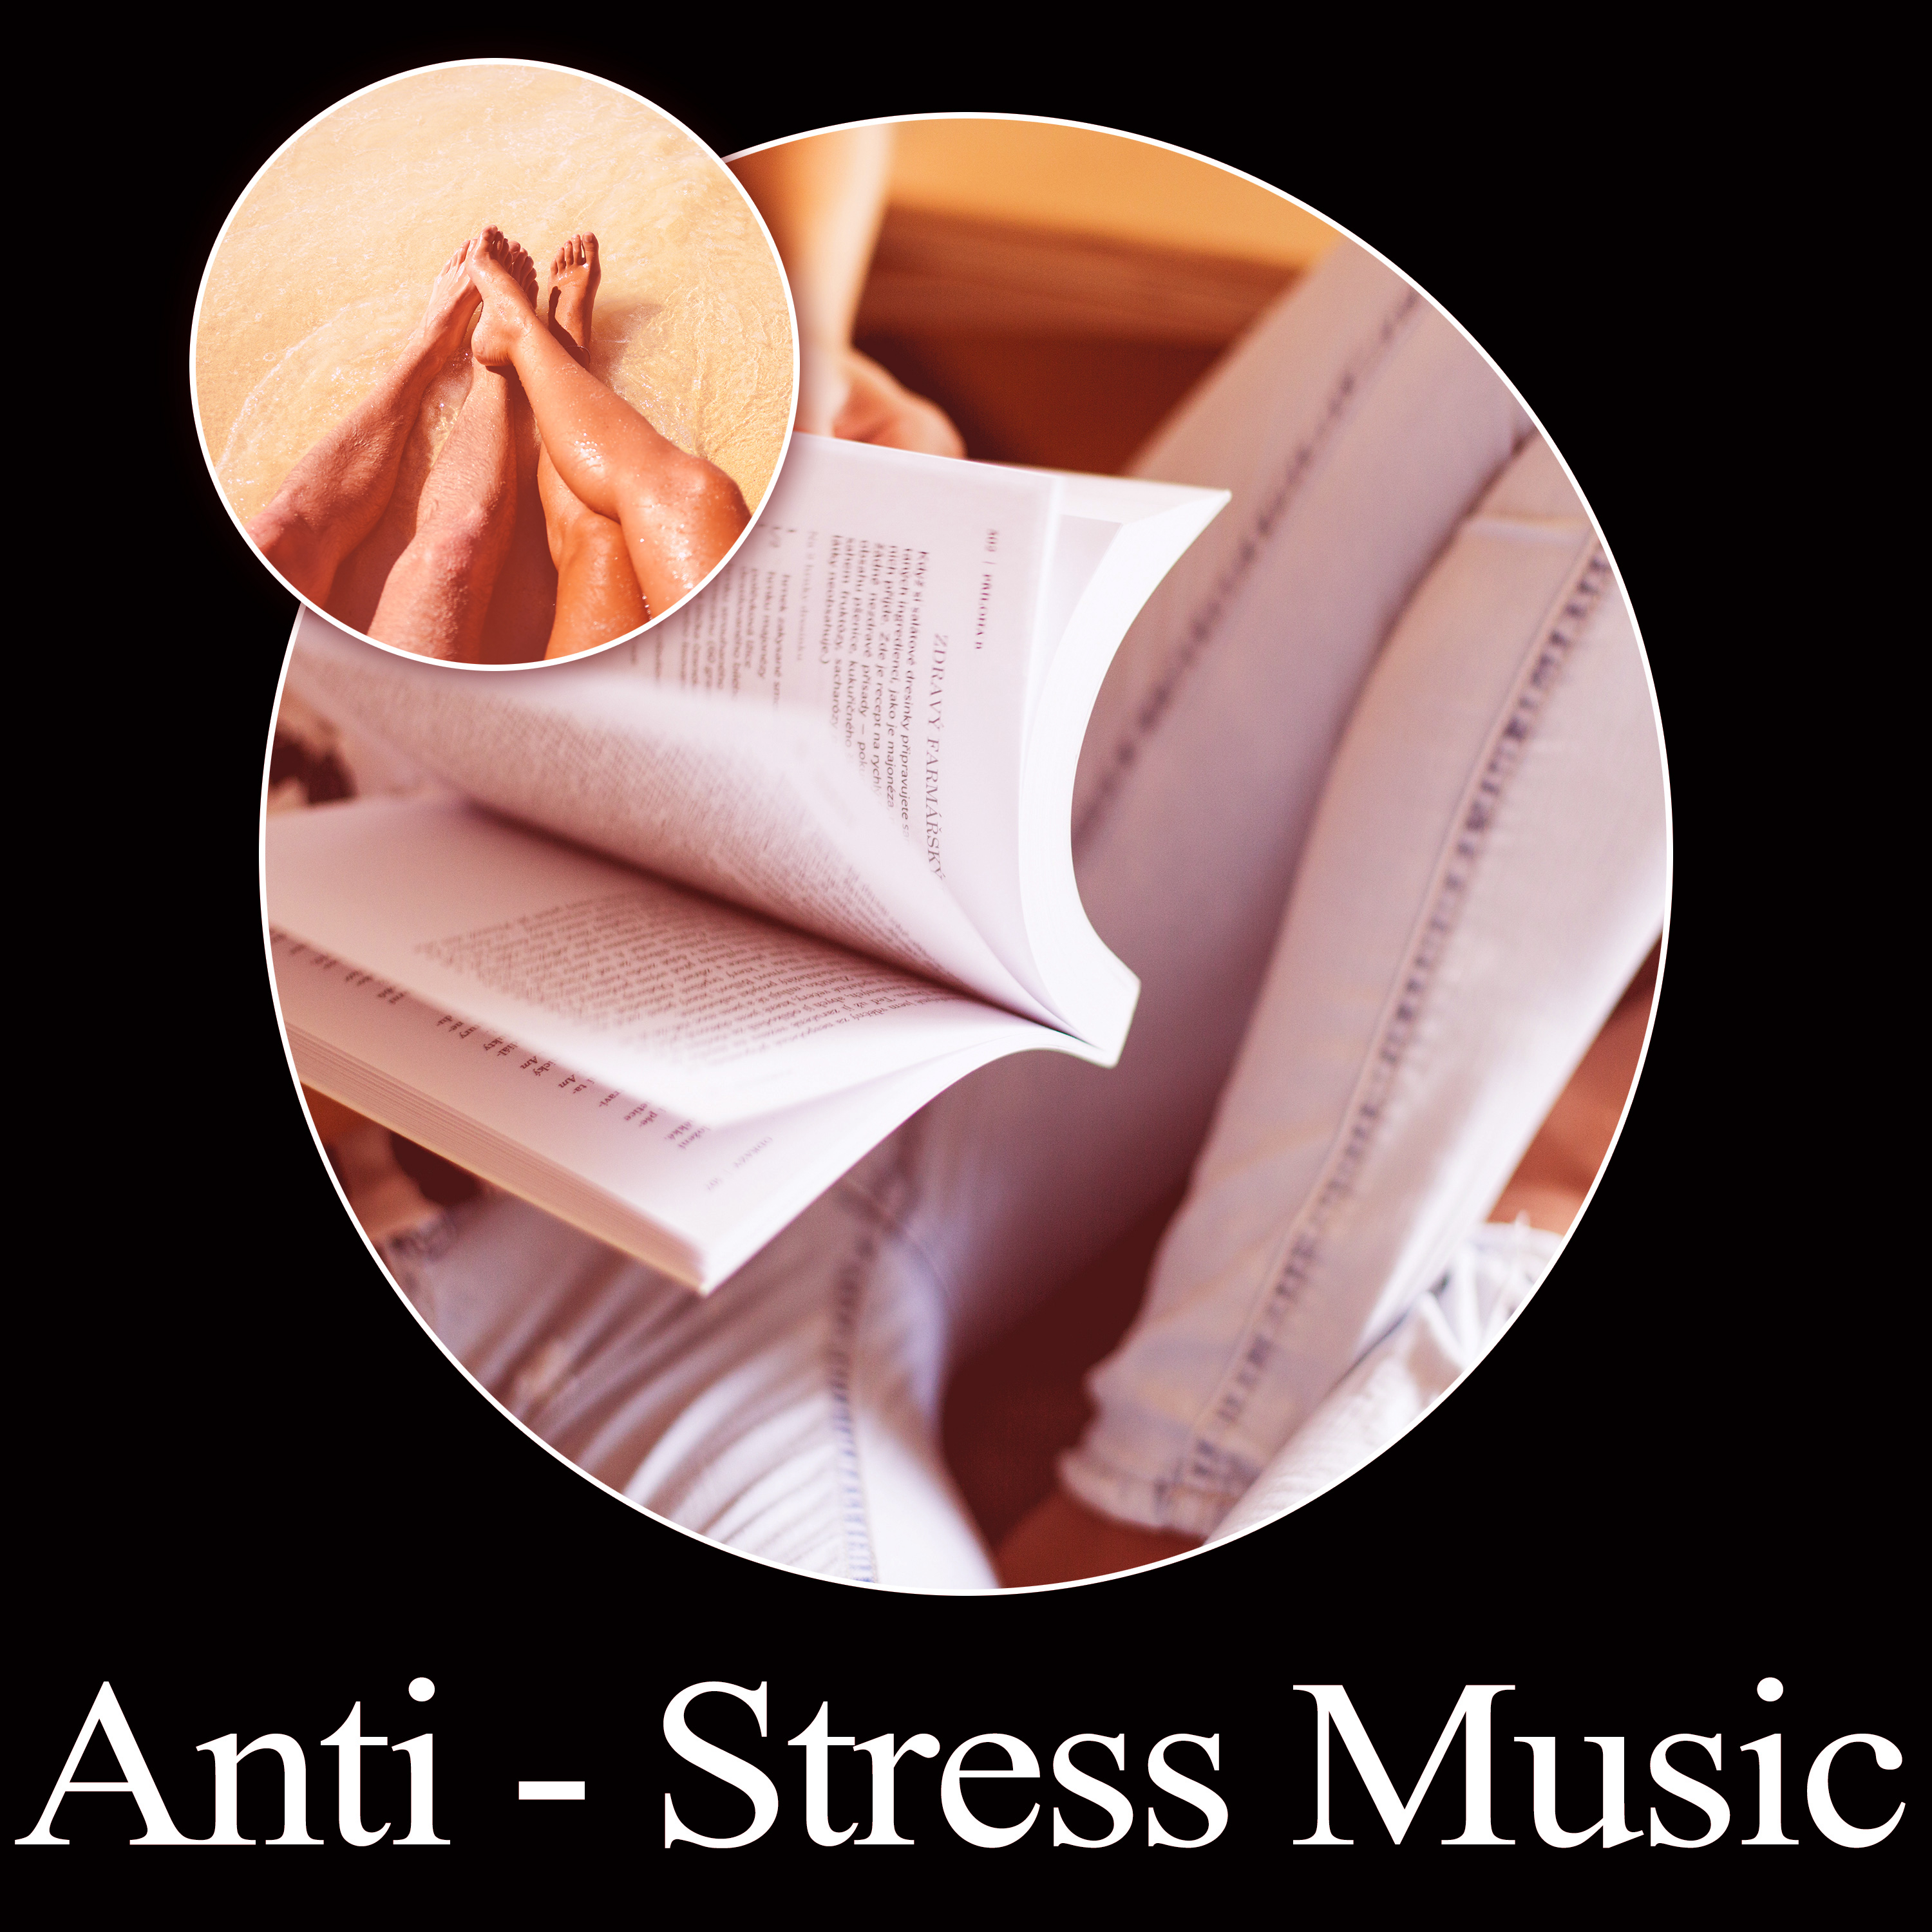 Anti - Stress Music  – Peaceful Nature Sounds for Relaxation, Find Inner Balance  & Stress Relief, Healing Sounds for Meditation, New Age